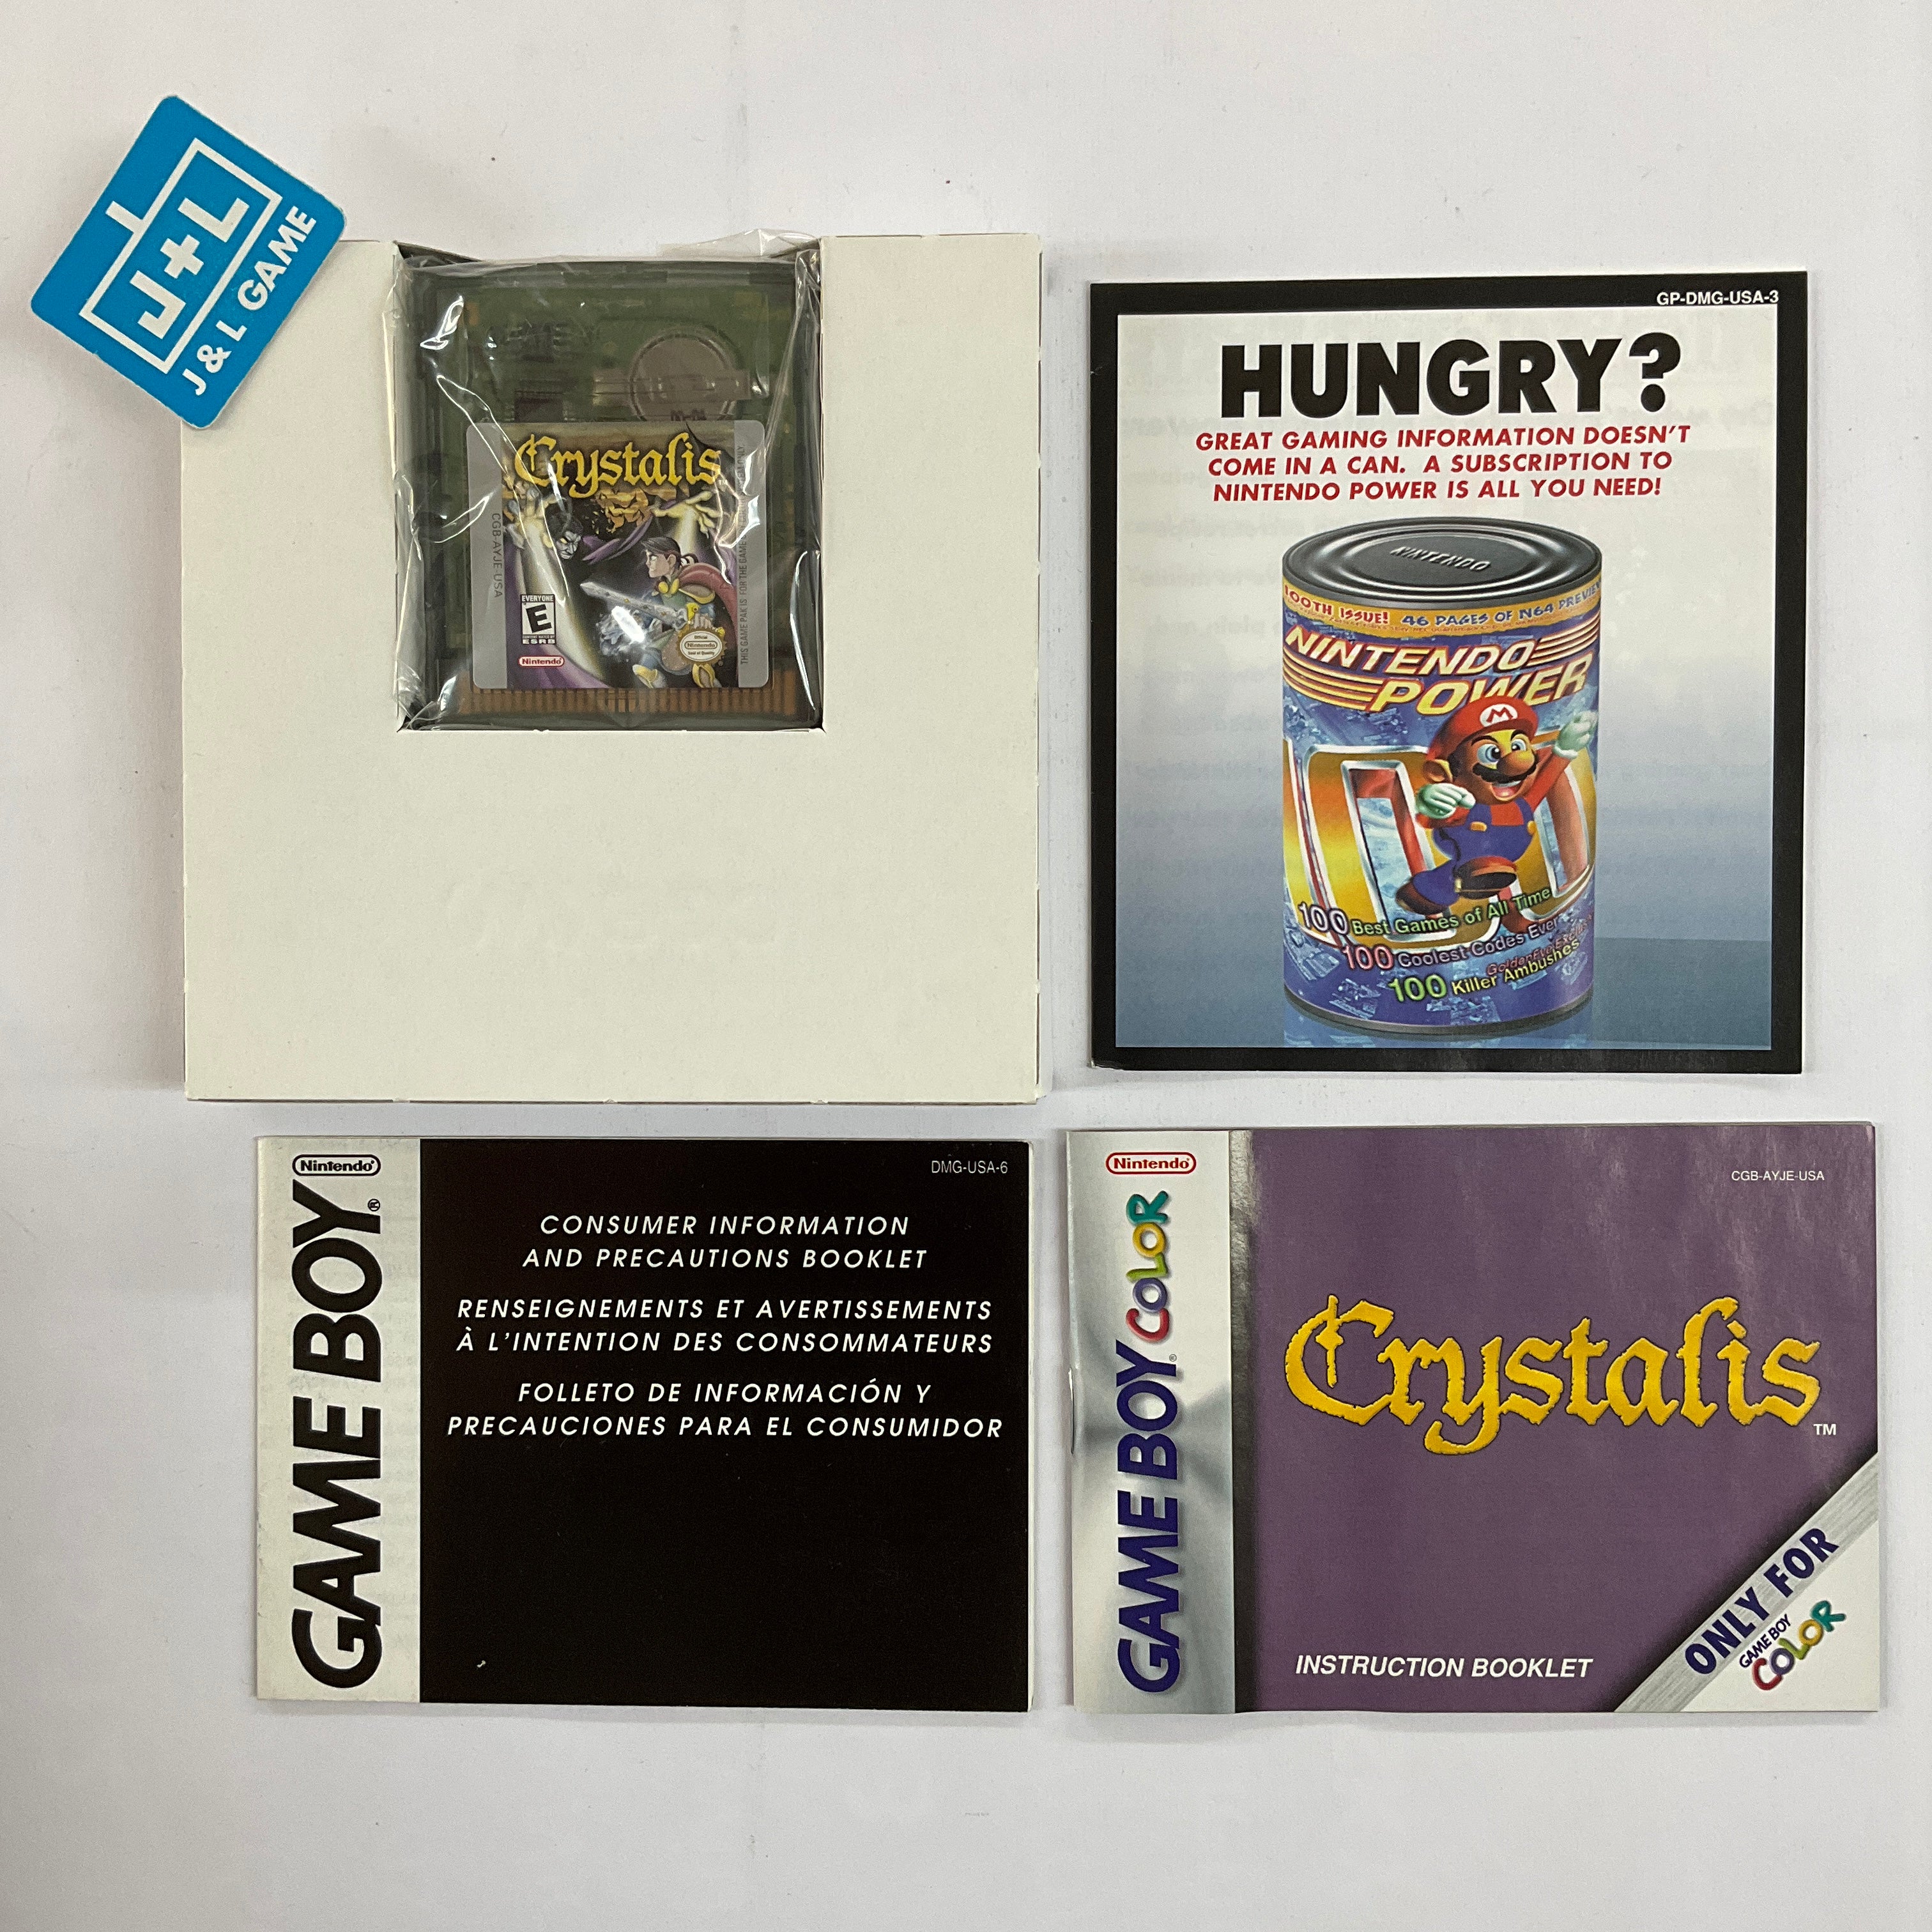 Crystalis - (GBC) Game Boy Color [Pre-Owned] Video Games Nintendo   